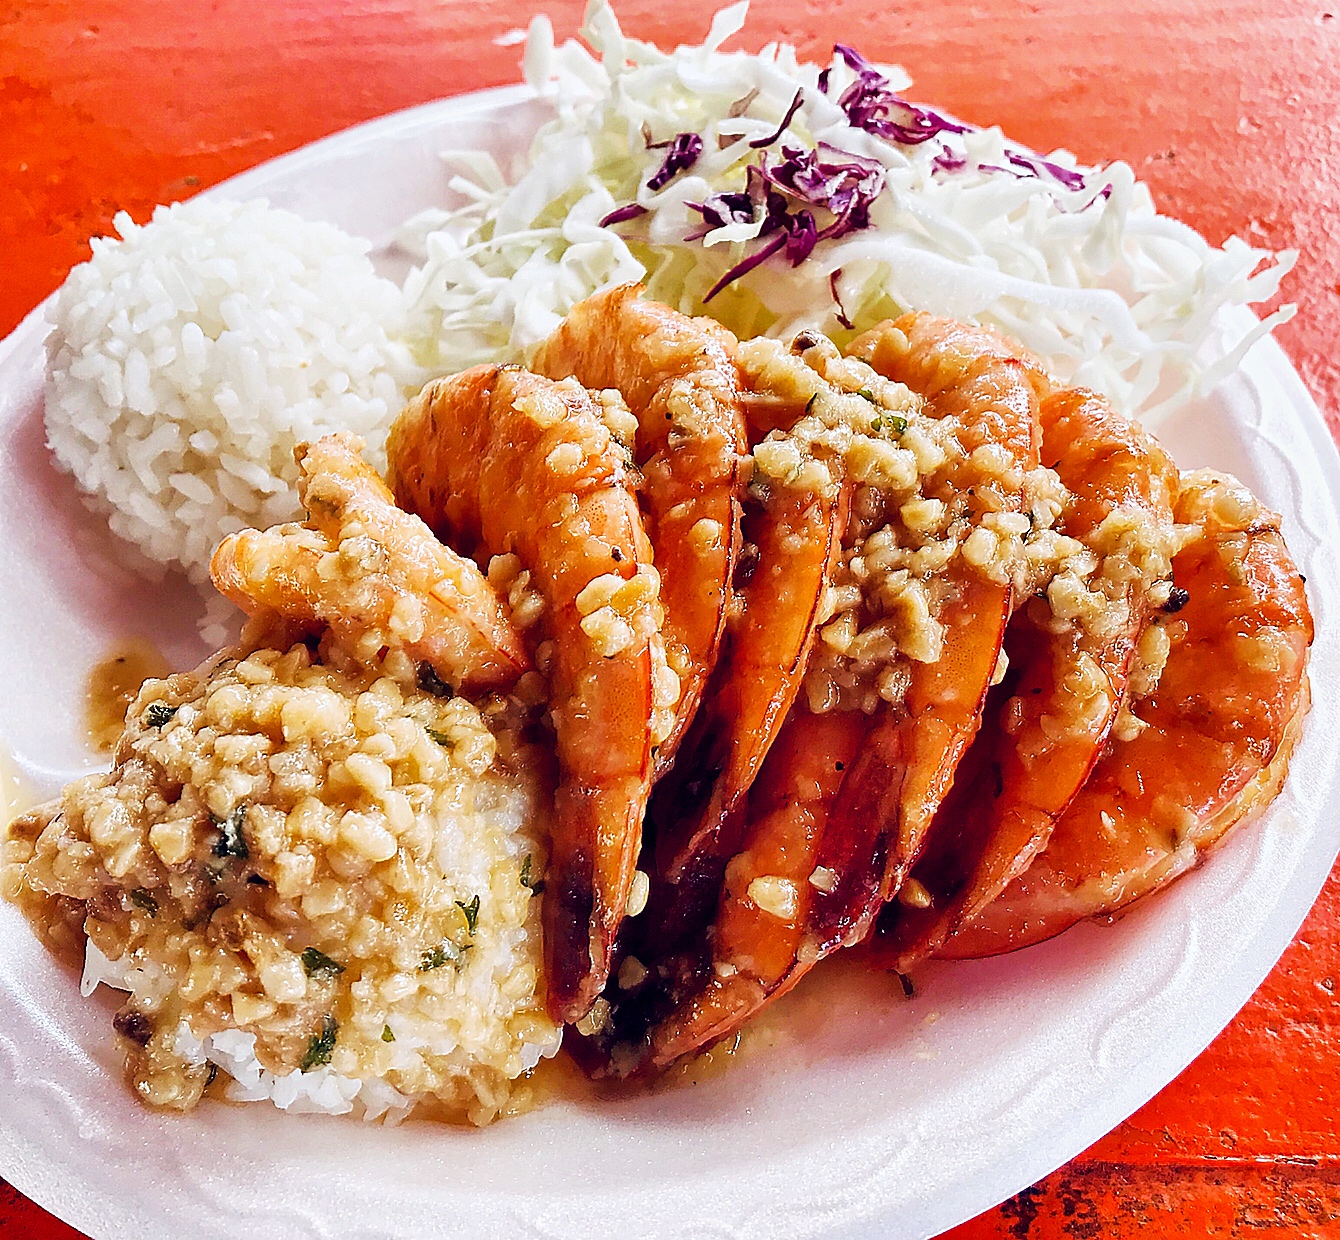  48 Hours In Hawaii: The Best Oahu Restaurants To Eat At